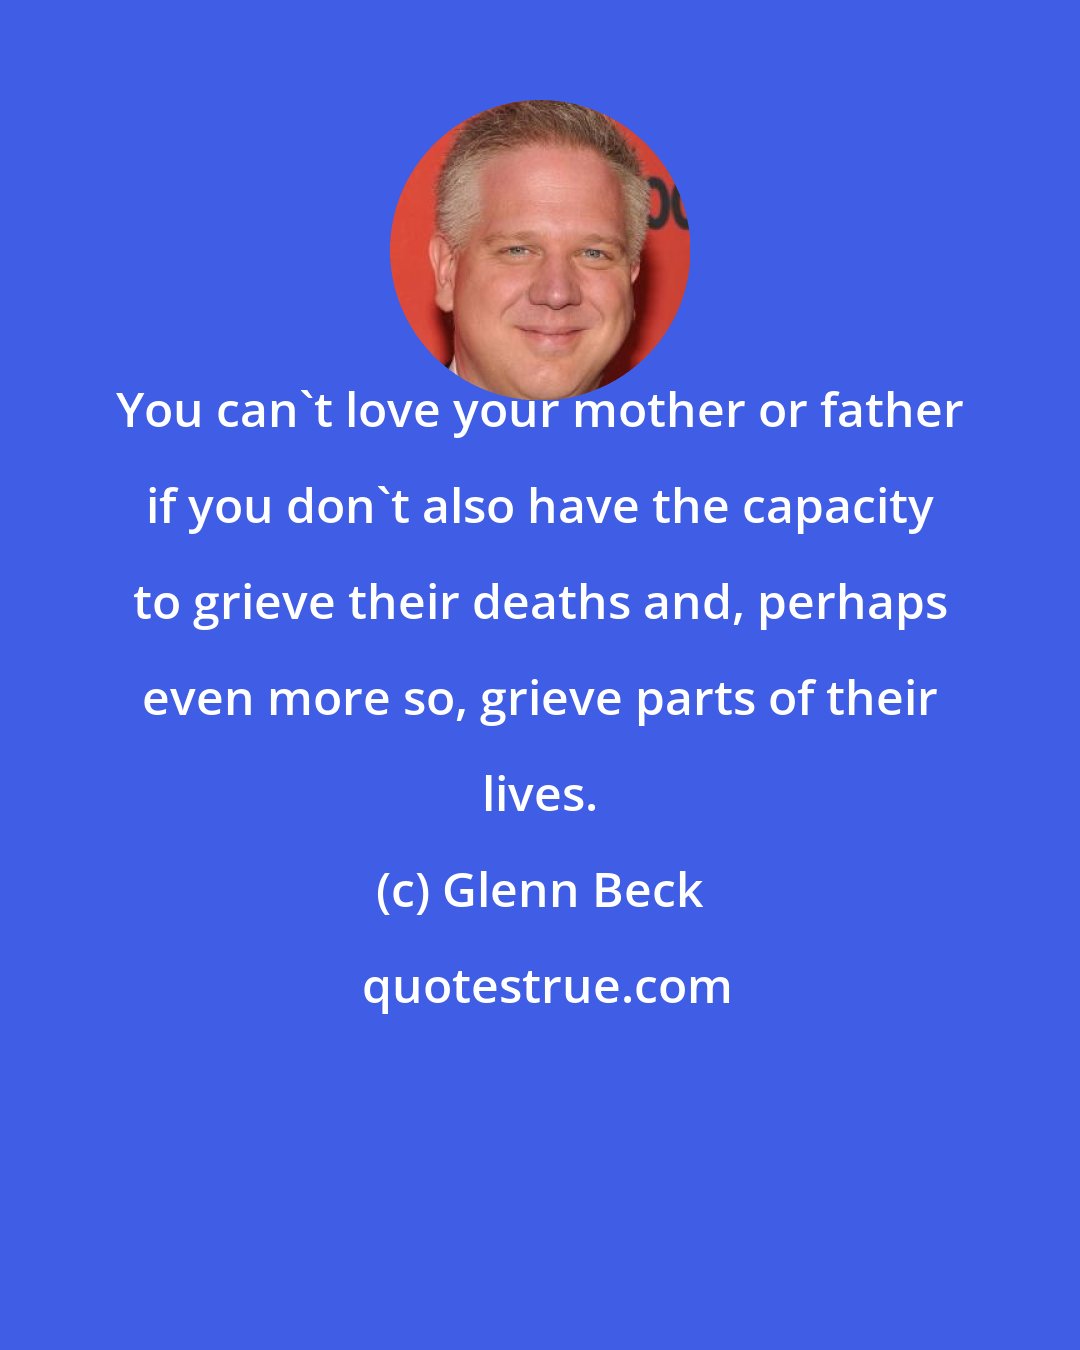 Glenn Beck: You can't love your mother or father if you don't also have the capacity to grieve their deaths and, perhaps even more so, grieve parts of their lives.